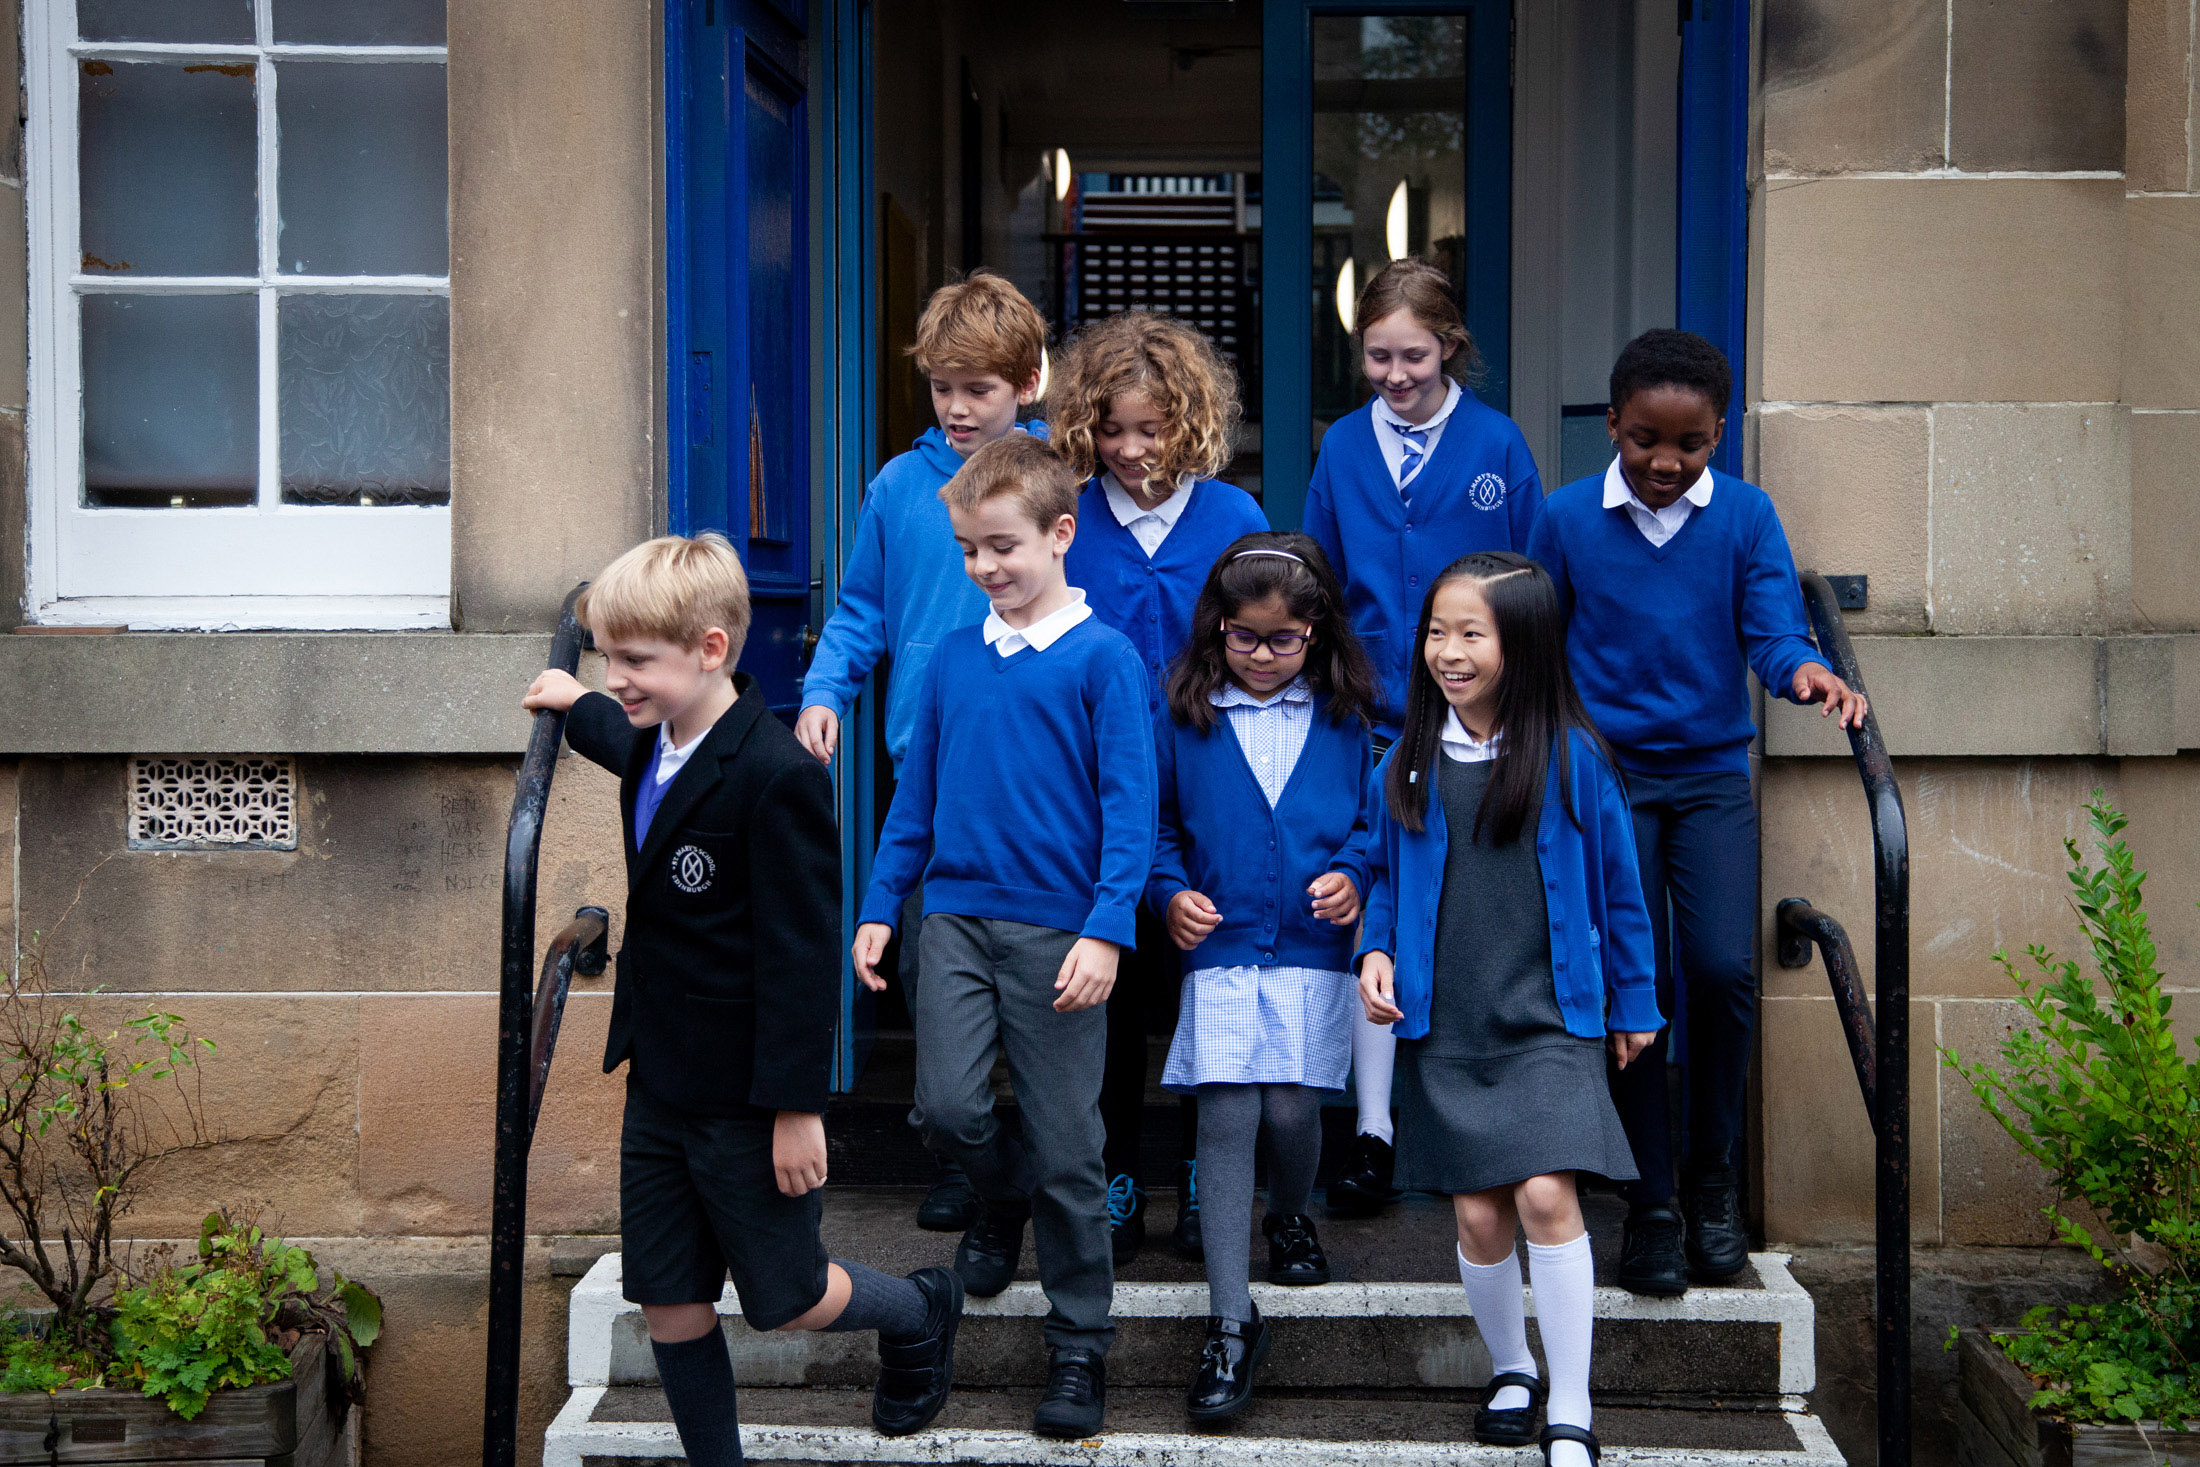 st marys pupils exiting the building